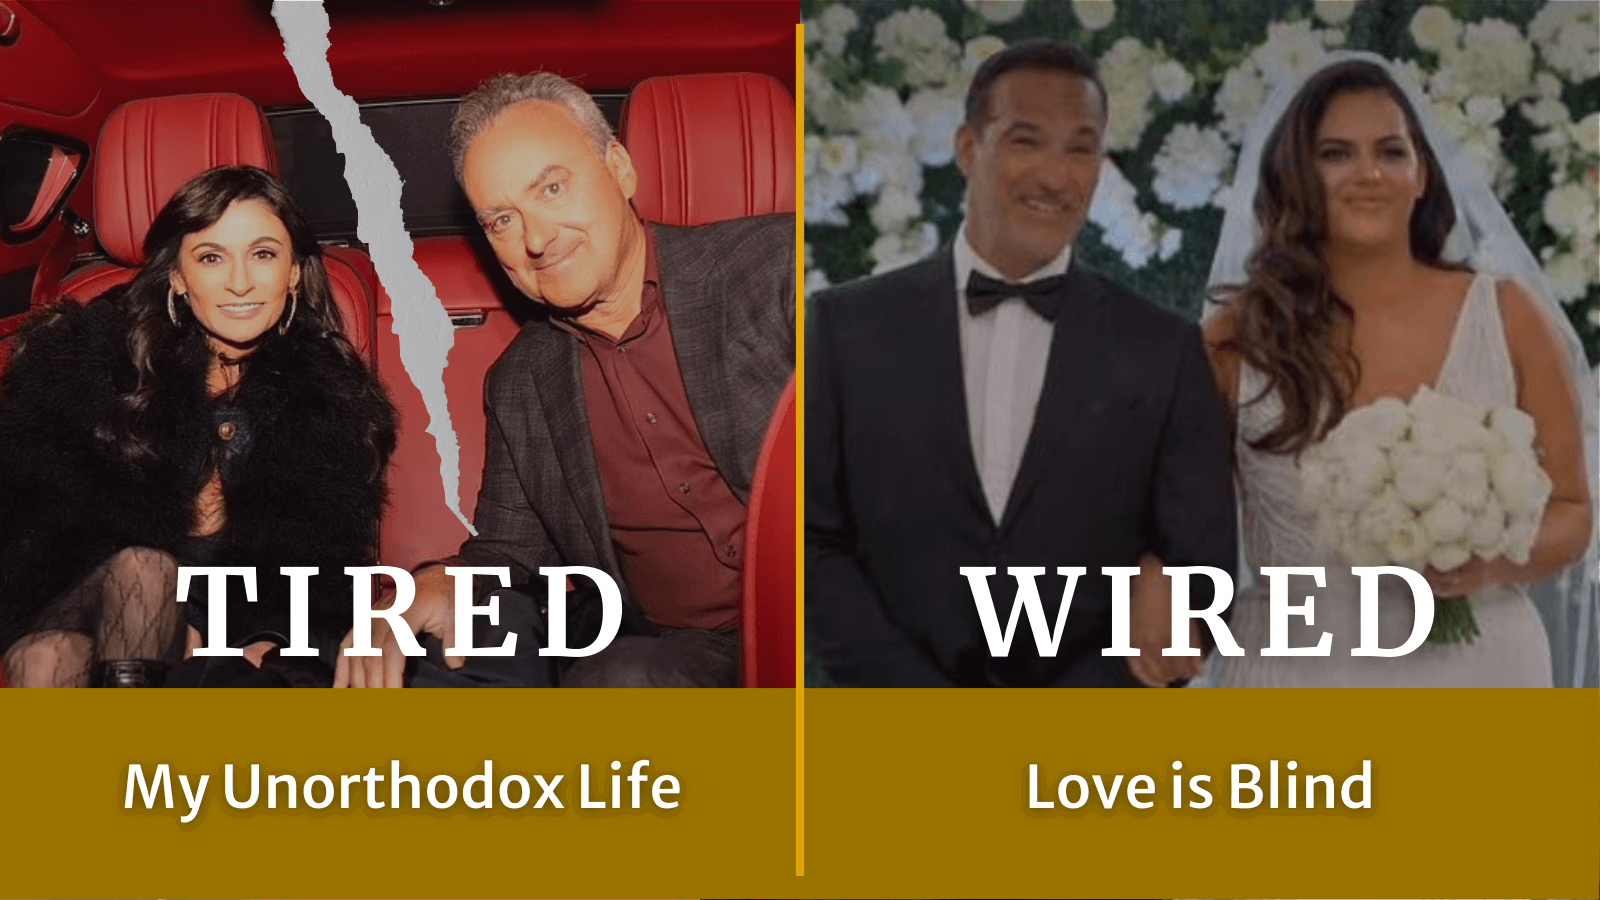 Tired: My Unorthodox Life. Wired: Love is Blind